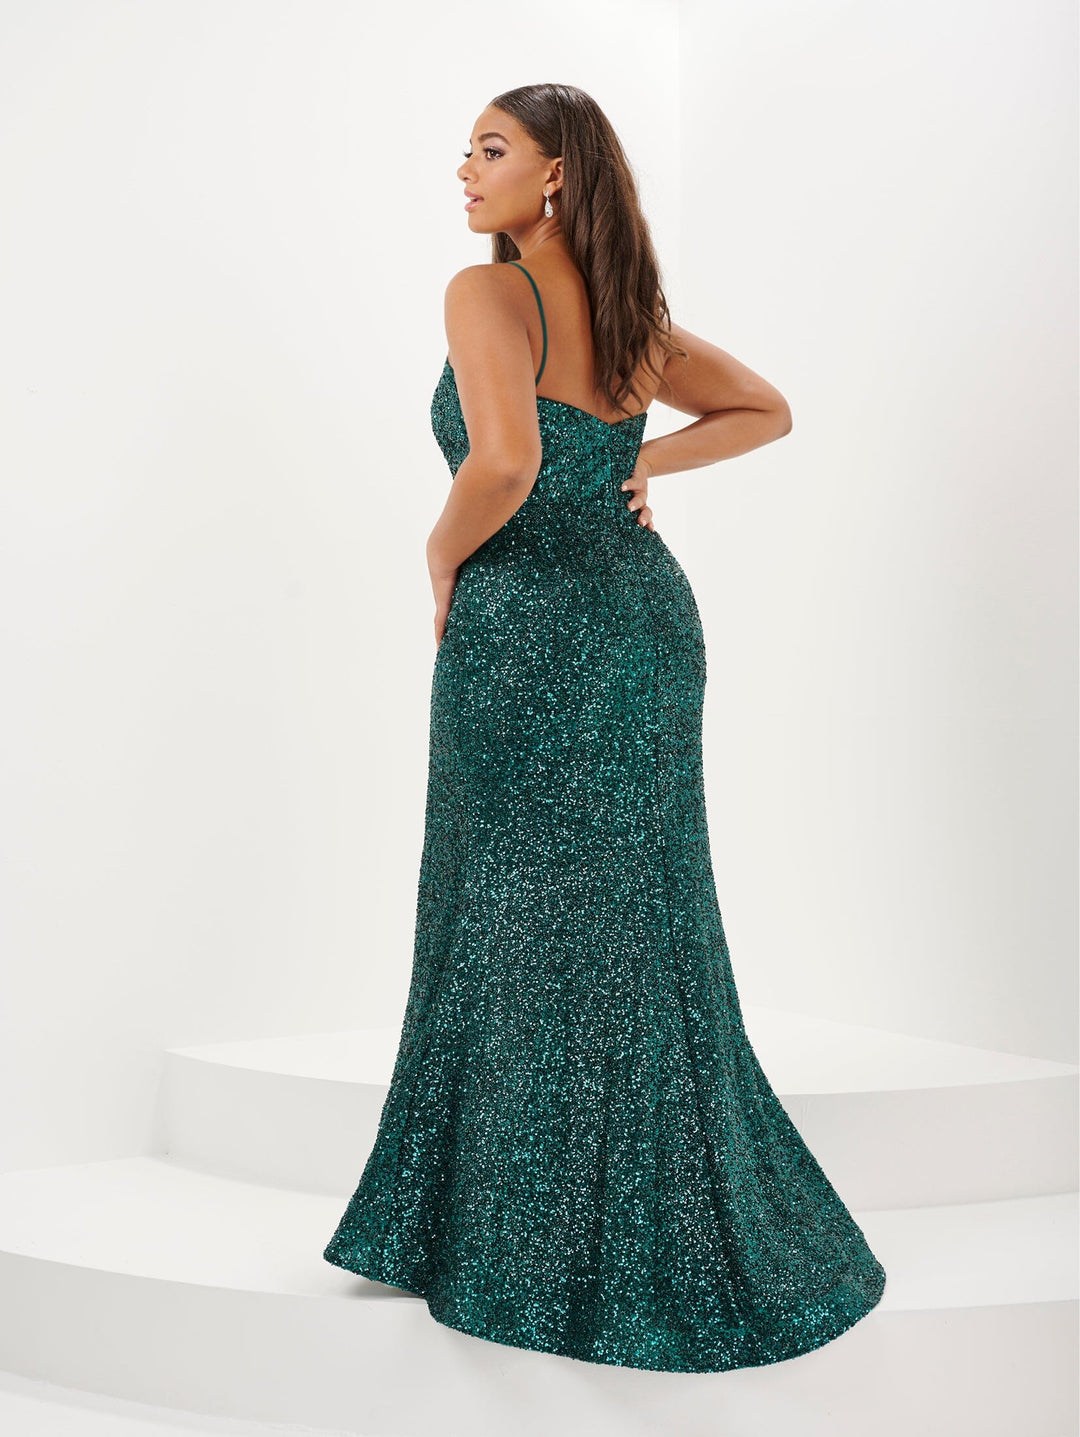 Plus Size Fitted Sequin Sleeveless Gown by Tiffany Designs 16121